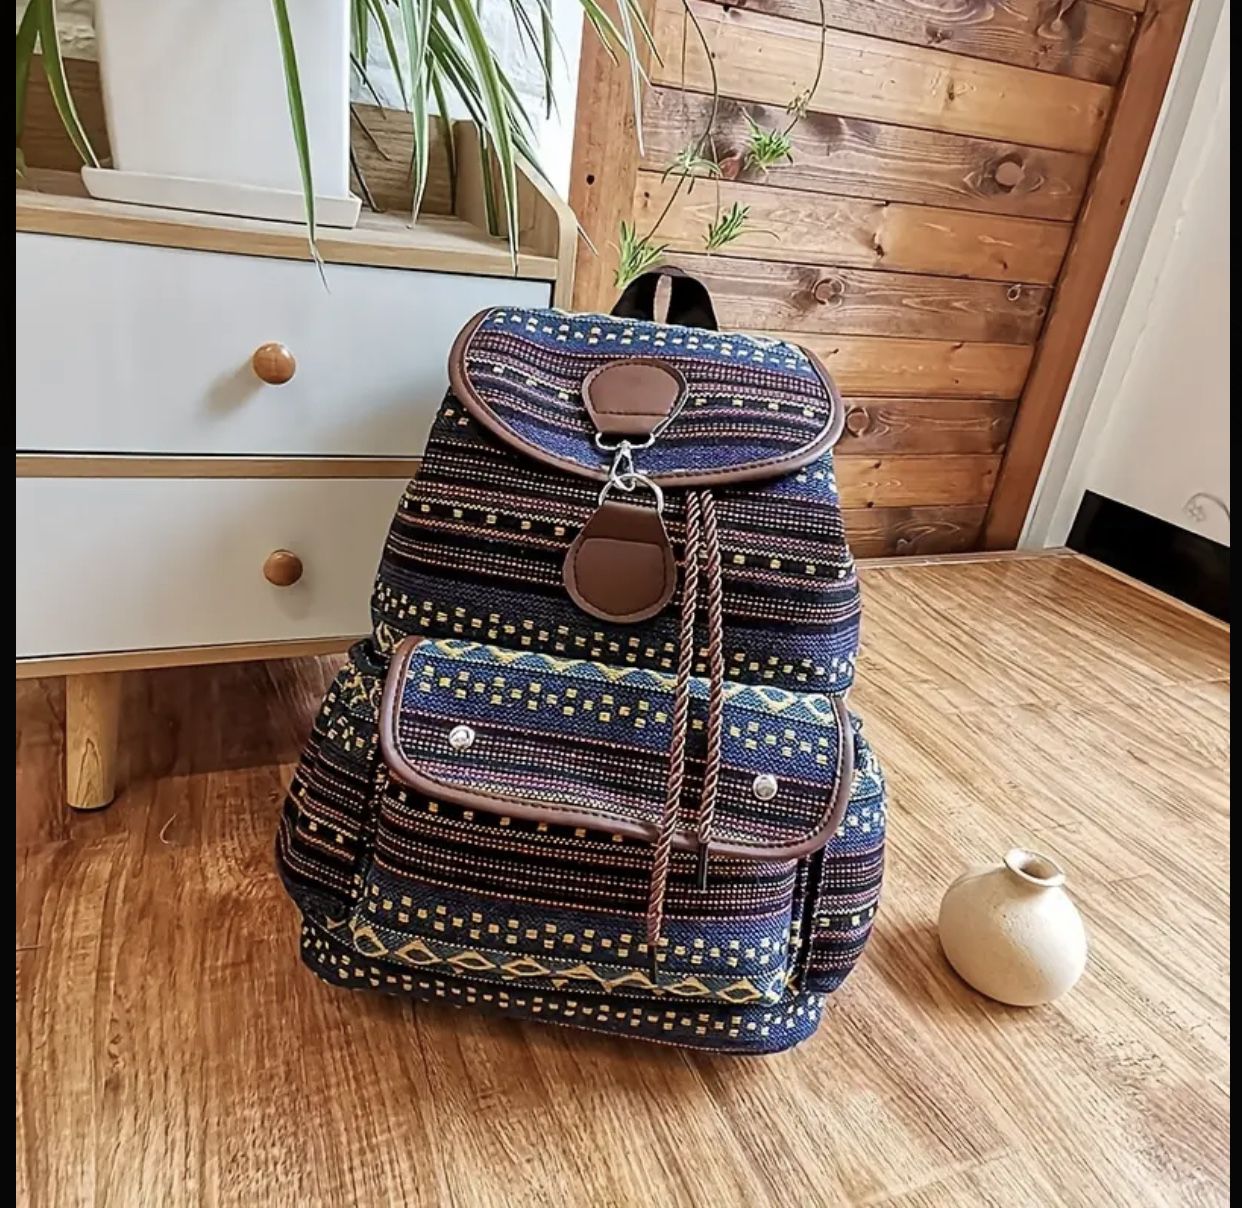 Vintage Vibes Flap Closure Backpack: Boho-Inspired Drawstring Daypack with Paisley Accents for Stylish Travel and School Days.